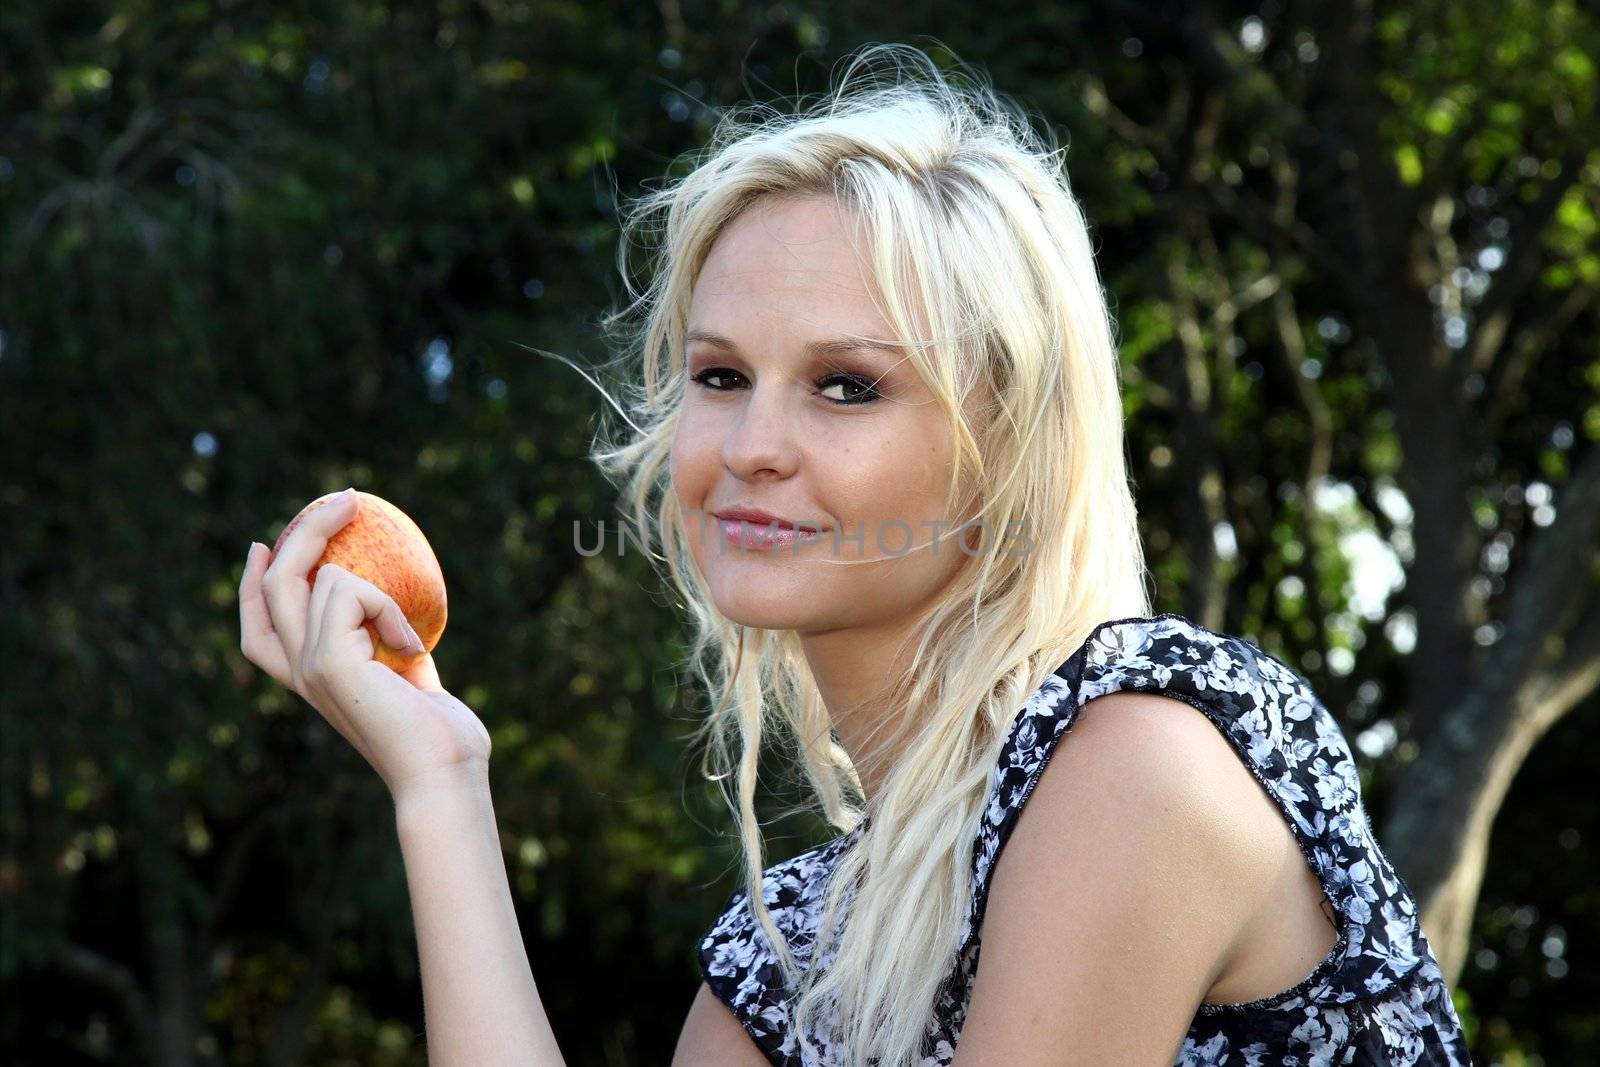 Gorgeous smiling blonde woman holding a juicy apple